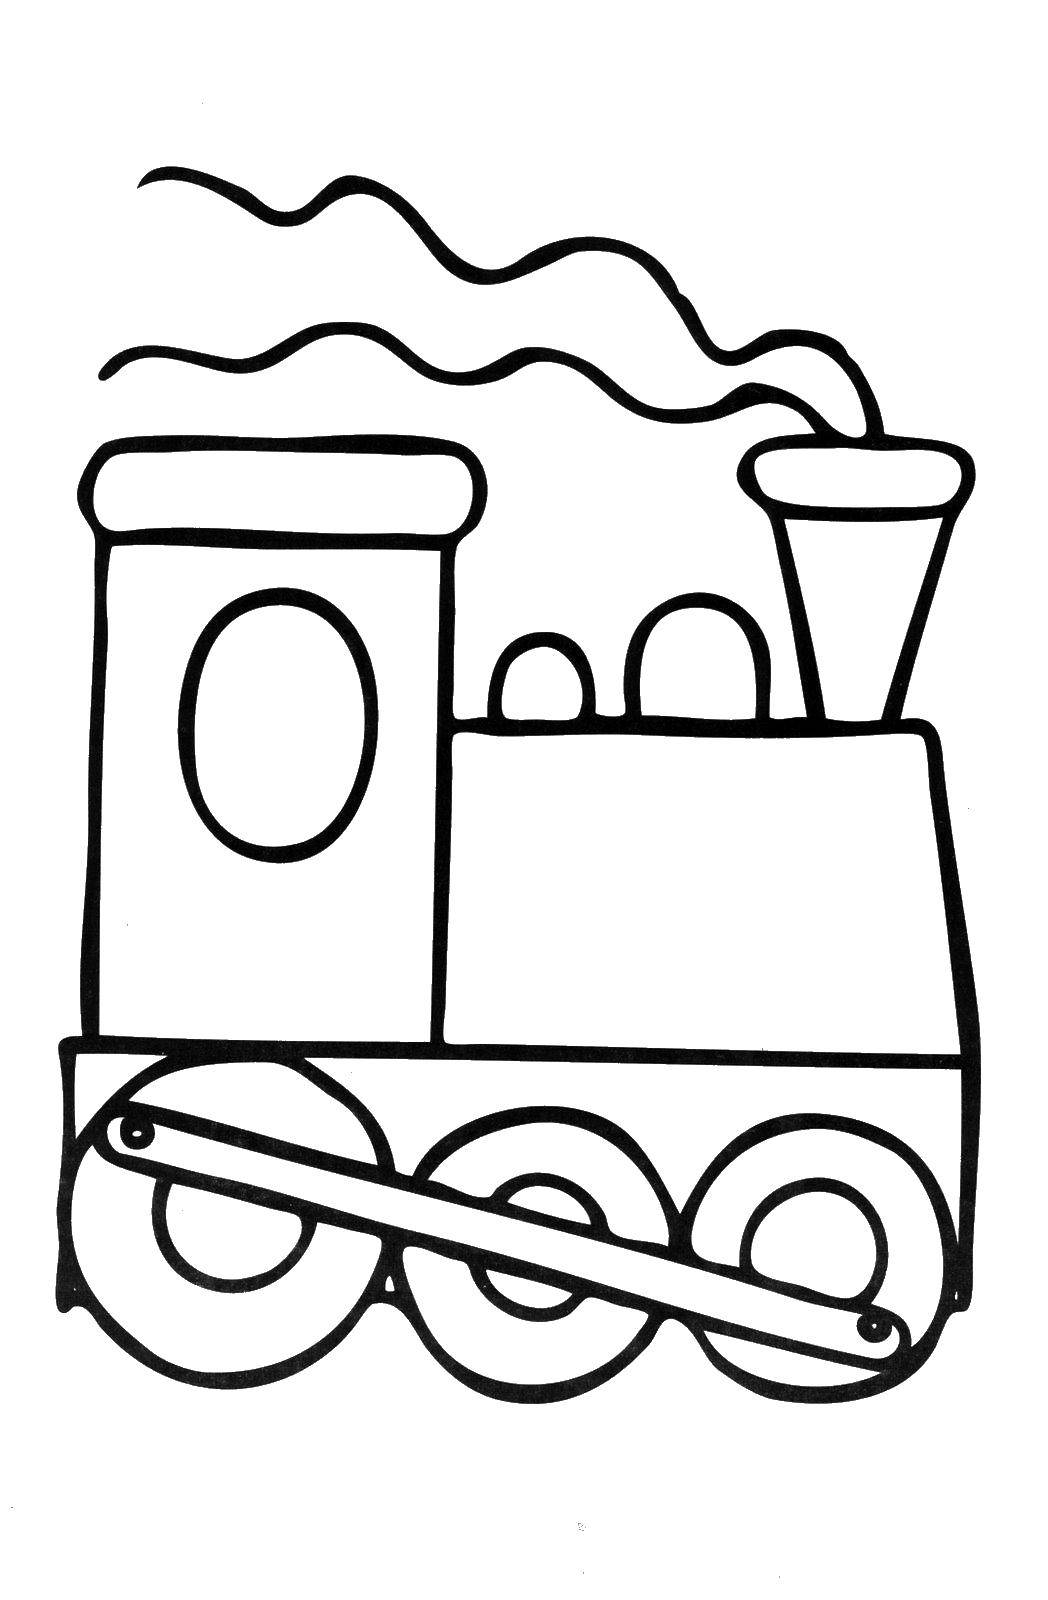 Coloring Train. Category coloring. Tags:  Train.